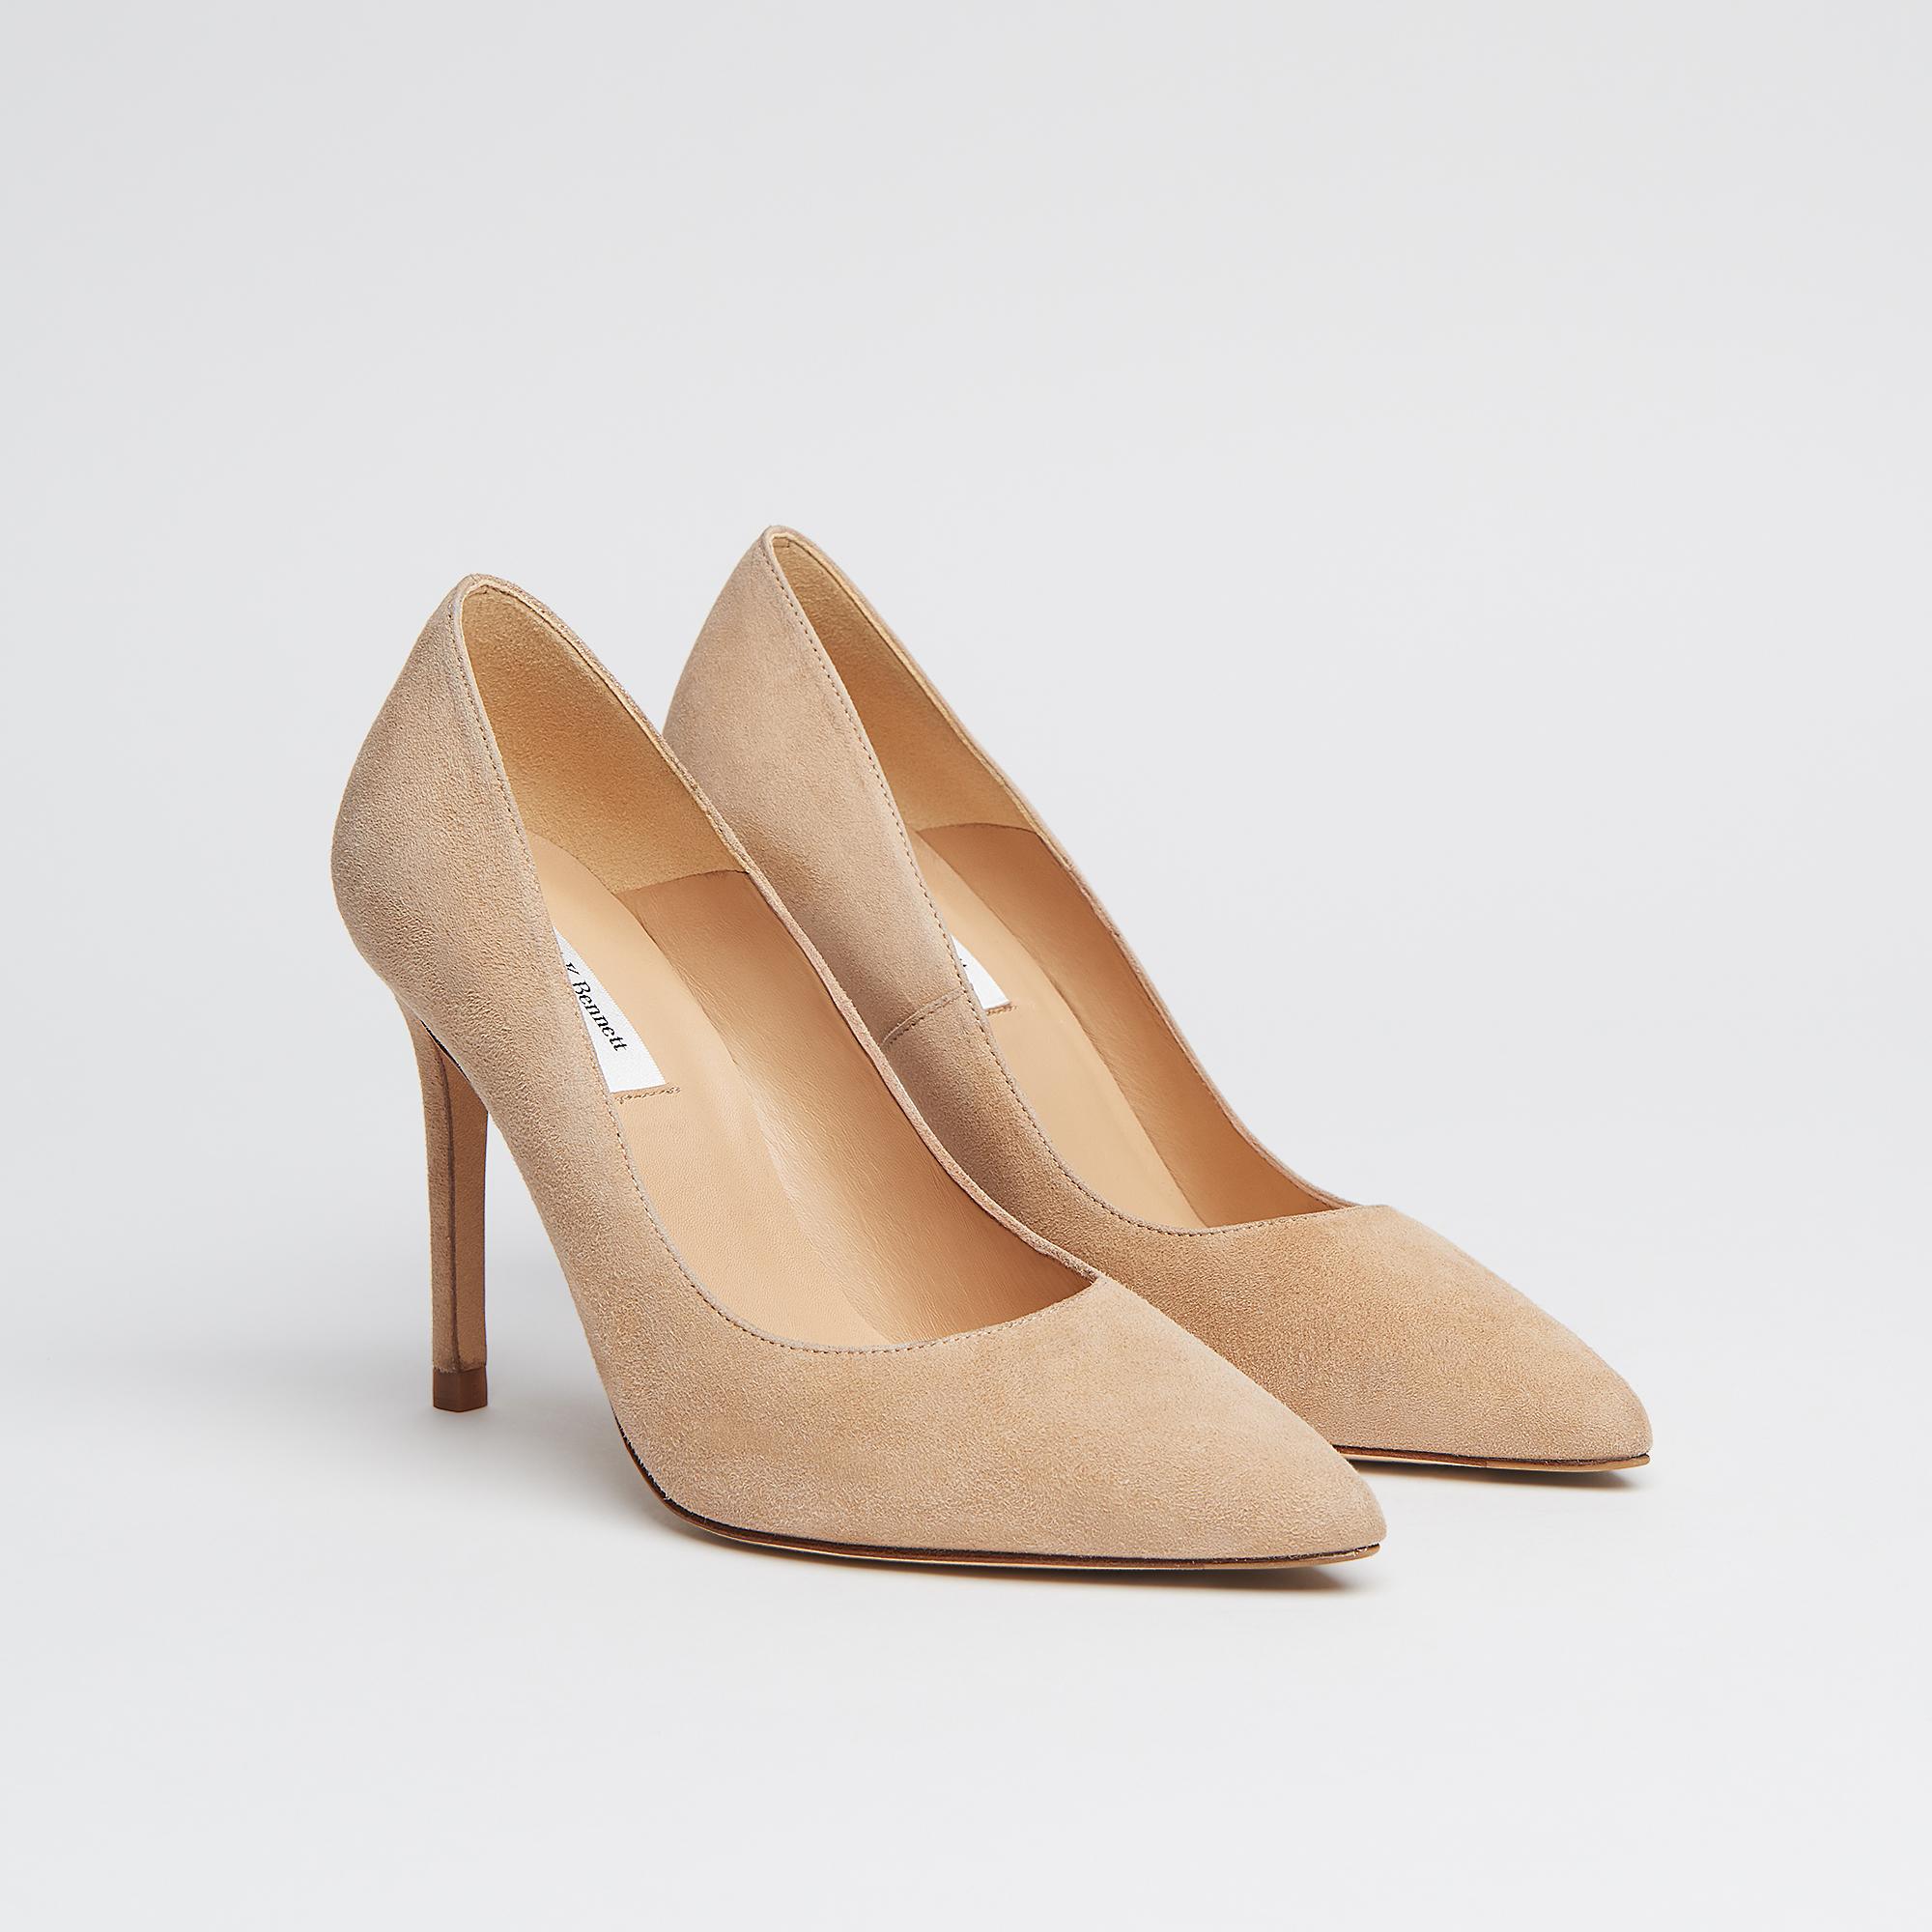 tan suede court shoes